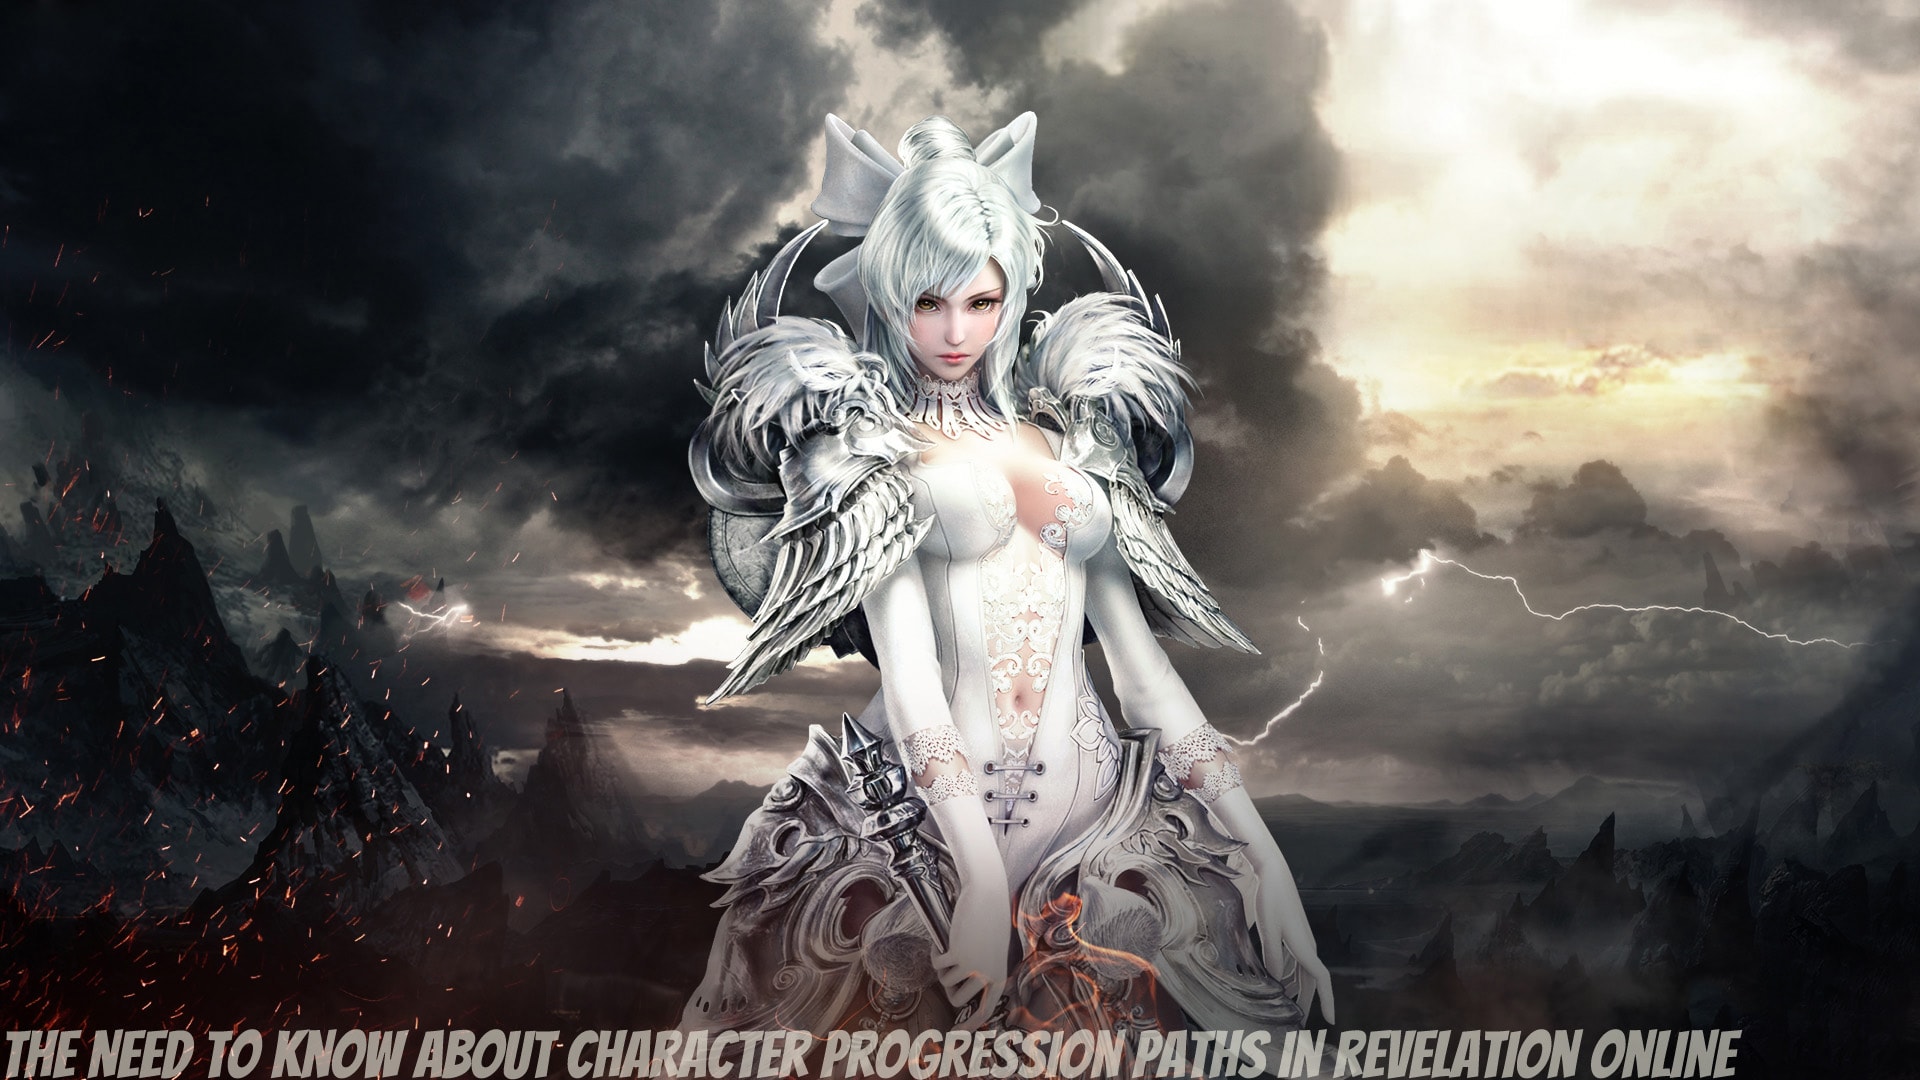 The Need To Know About Character Progression Paths In Revelation Online